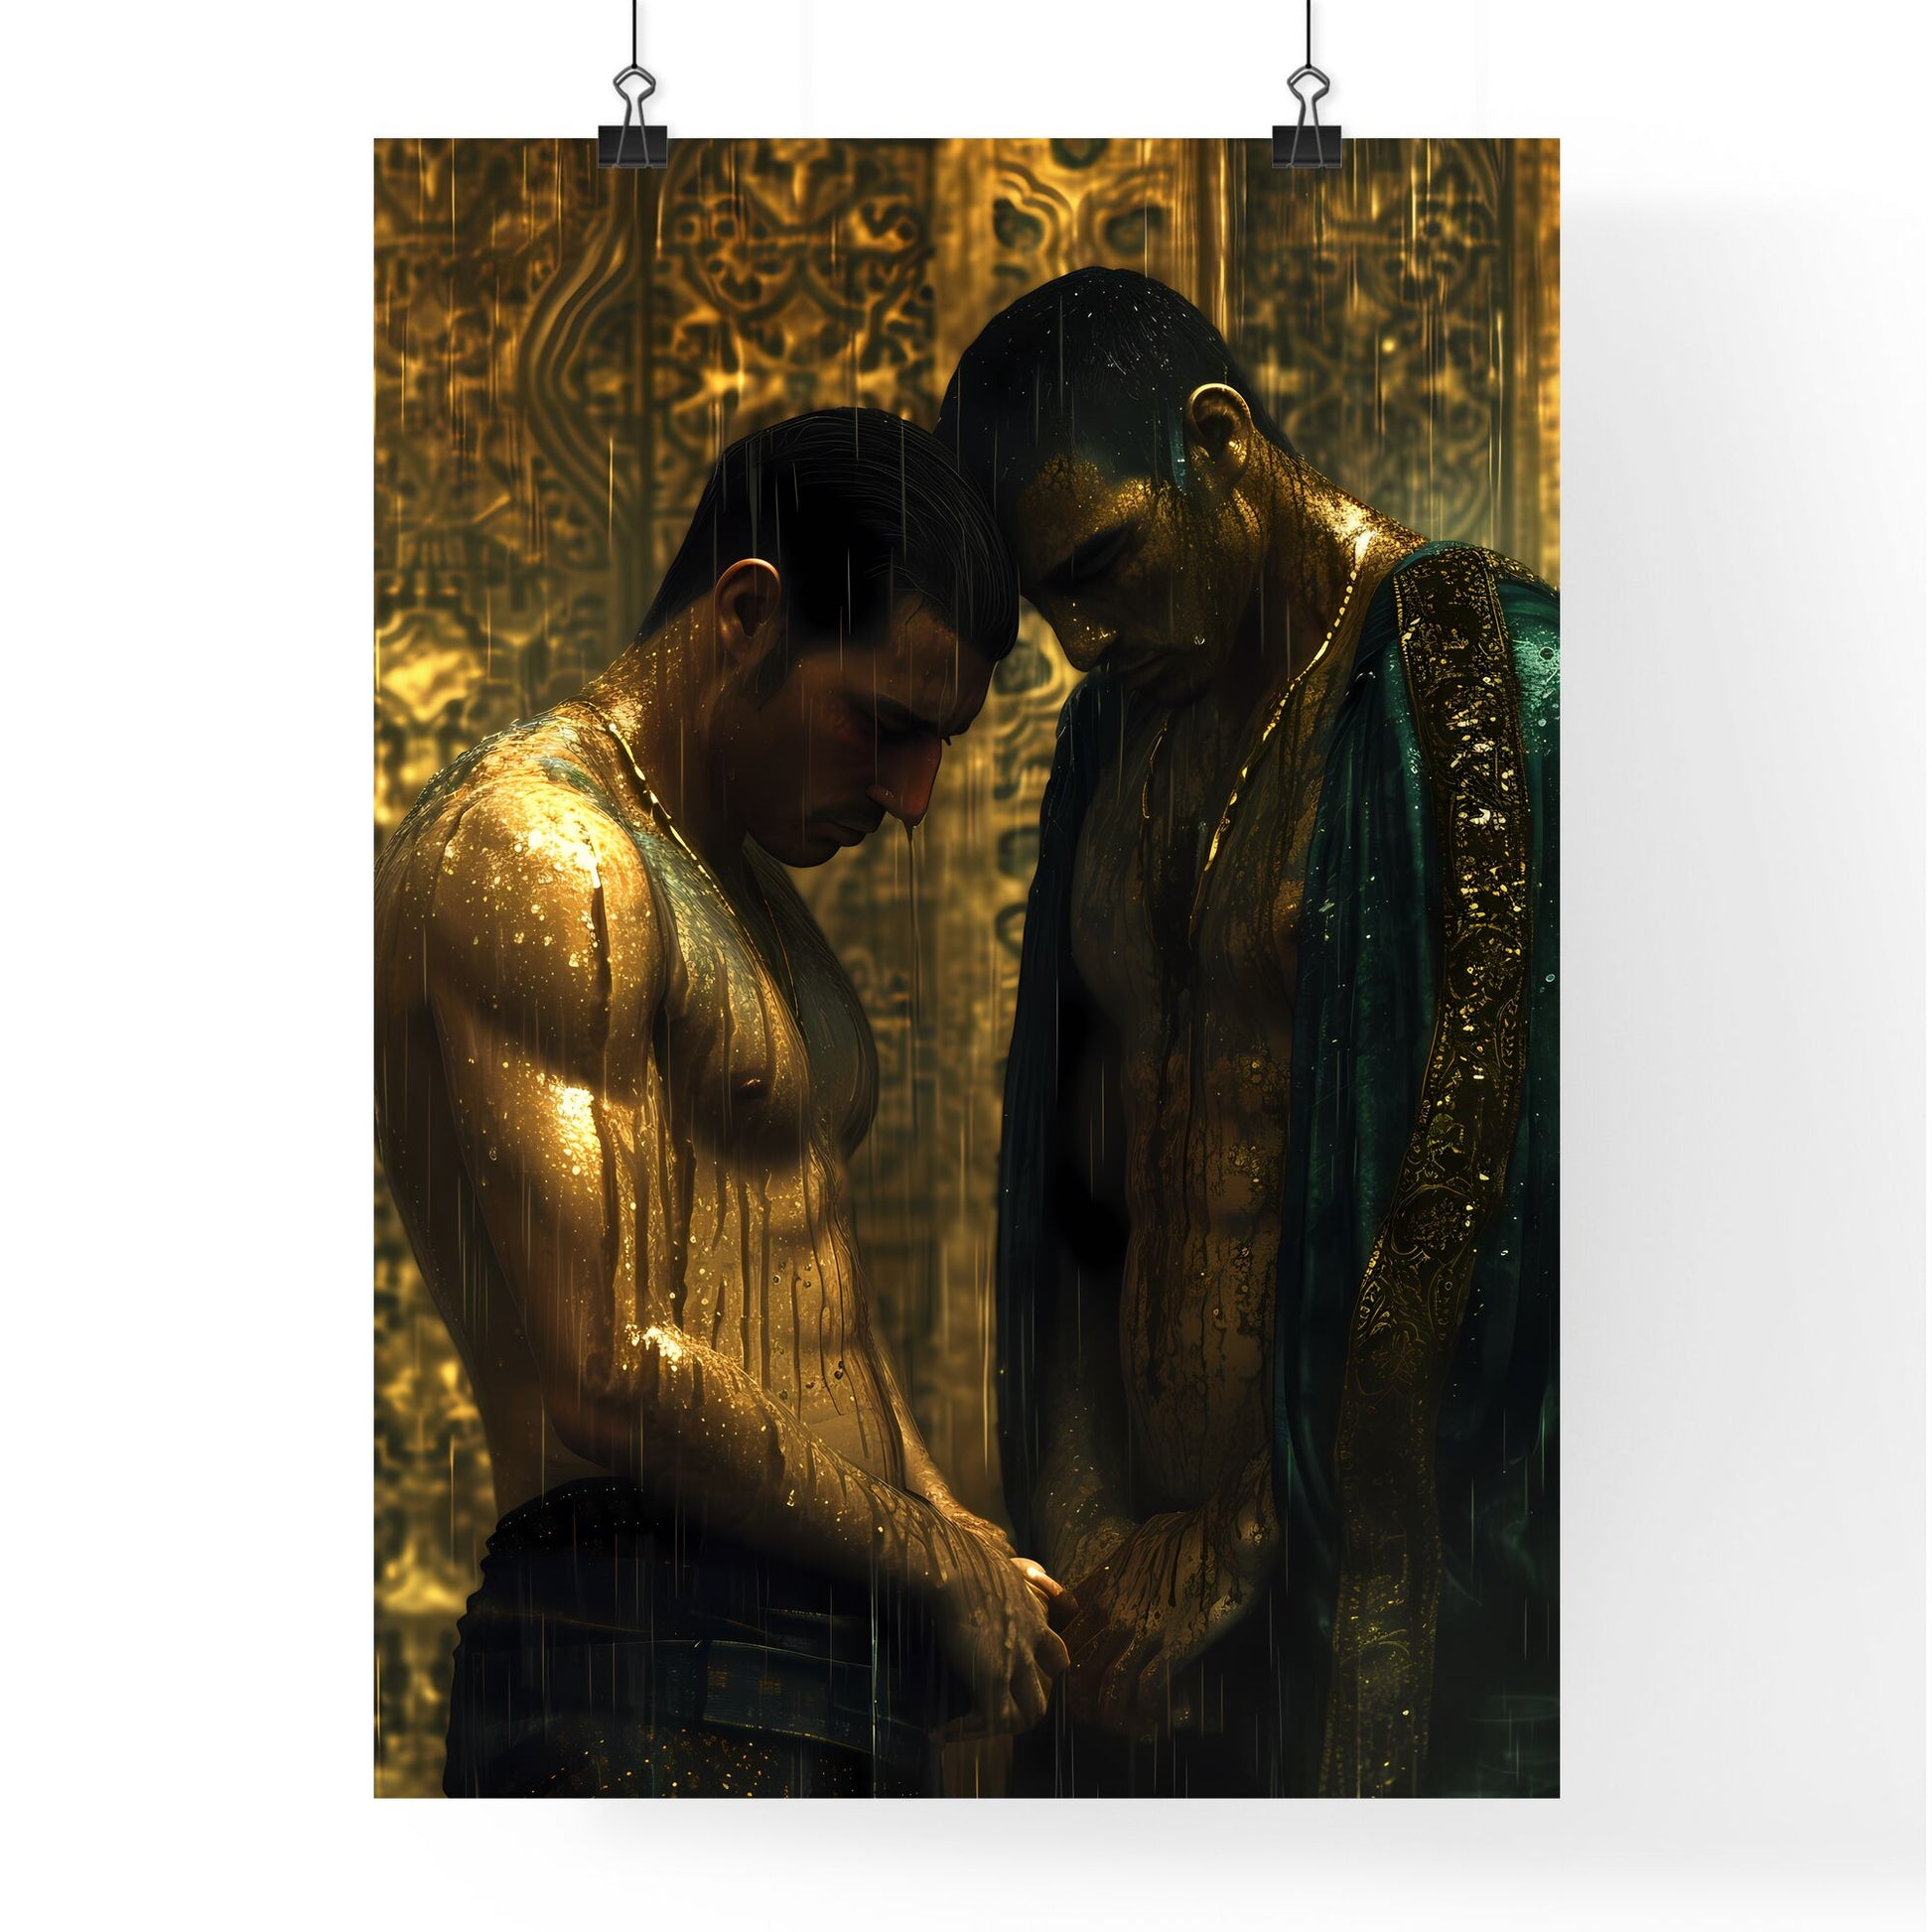 Two young man, Cain and Abel, praying to God in a sacred place - Art print of two men in wet clothes Default Title